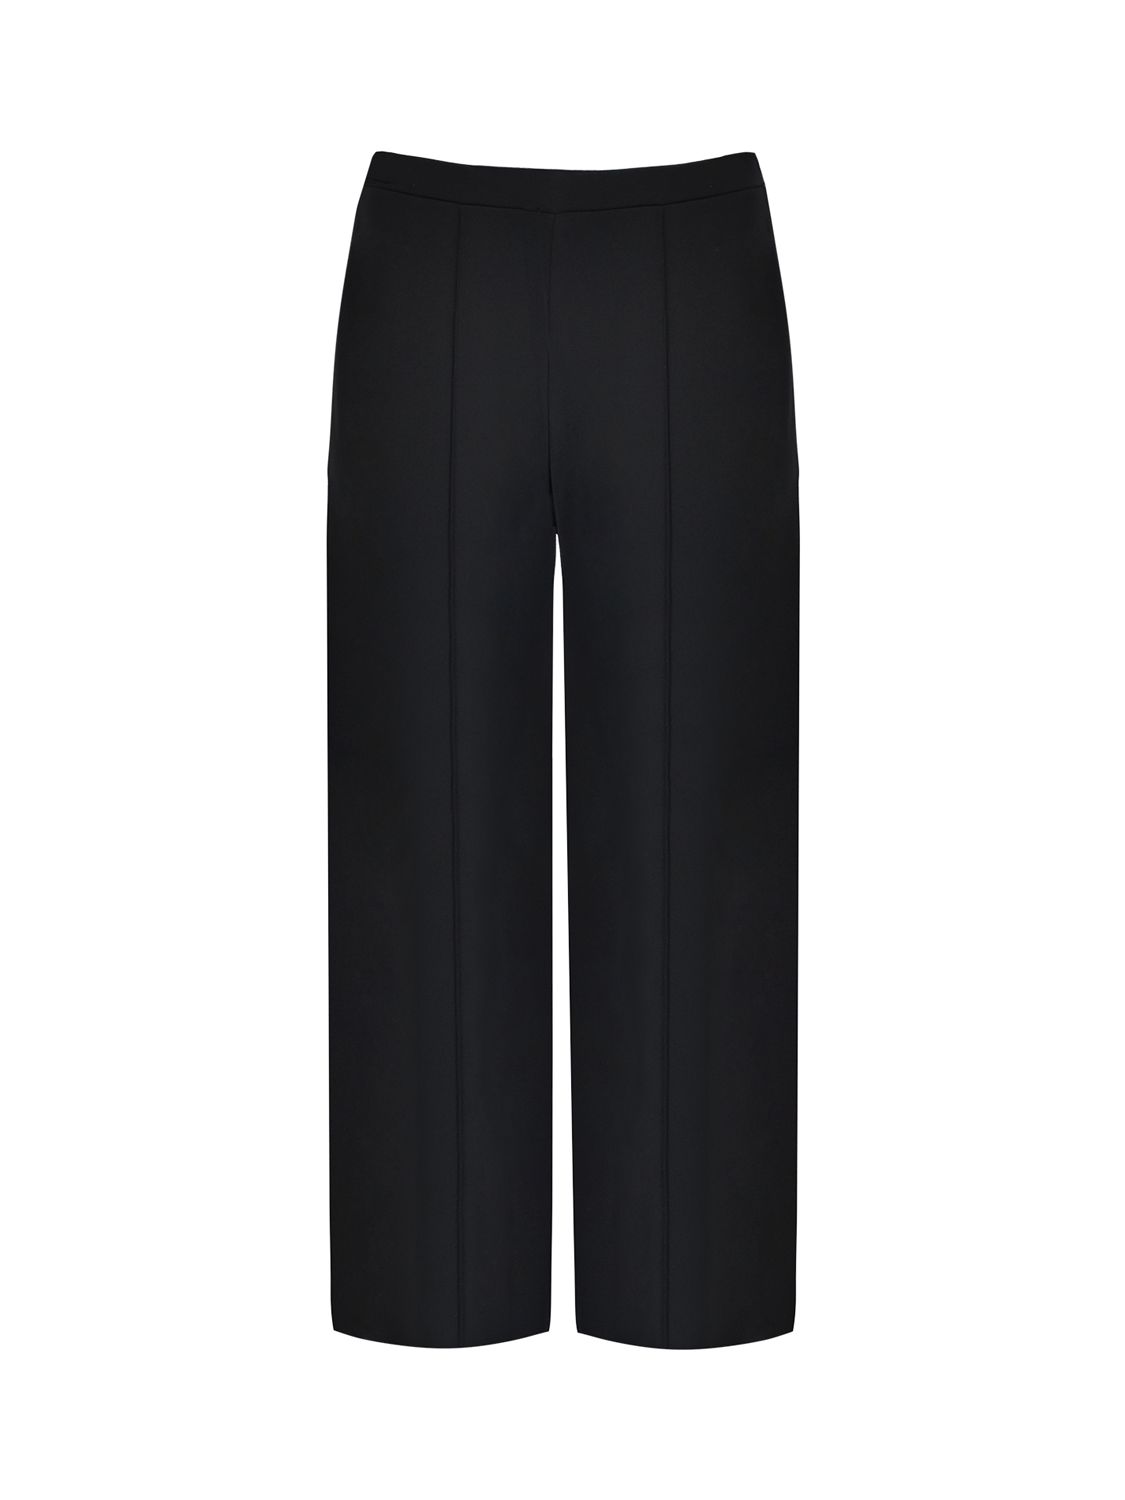 Live Unlimited Curve Bootleg Trousers, Black at John Lewis & Partners